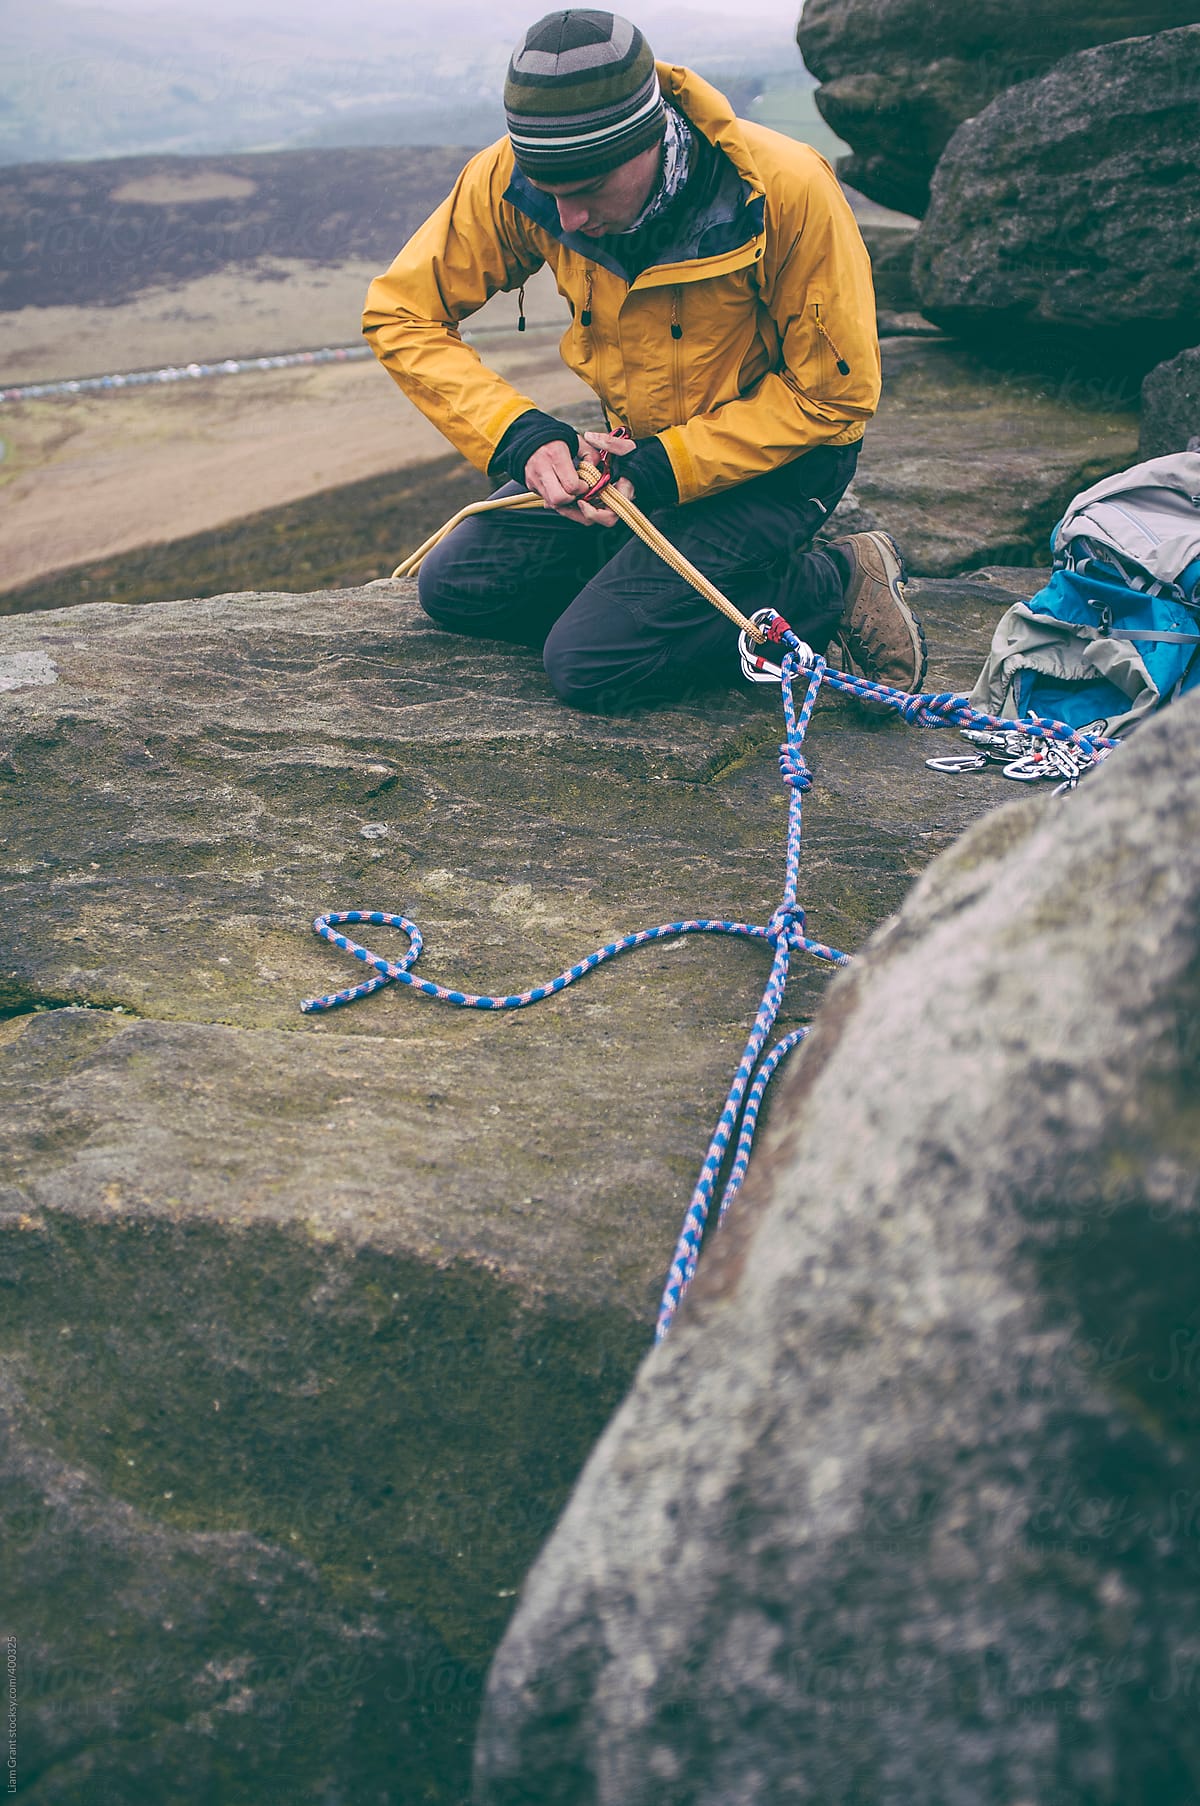 Climber setting up rope for abseiling.